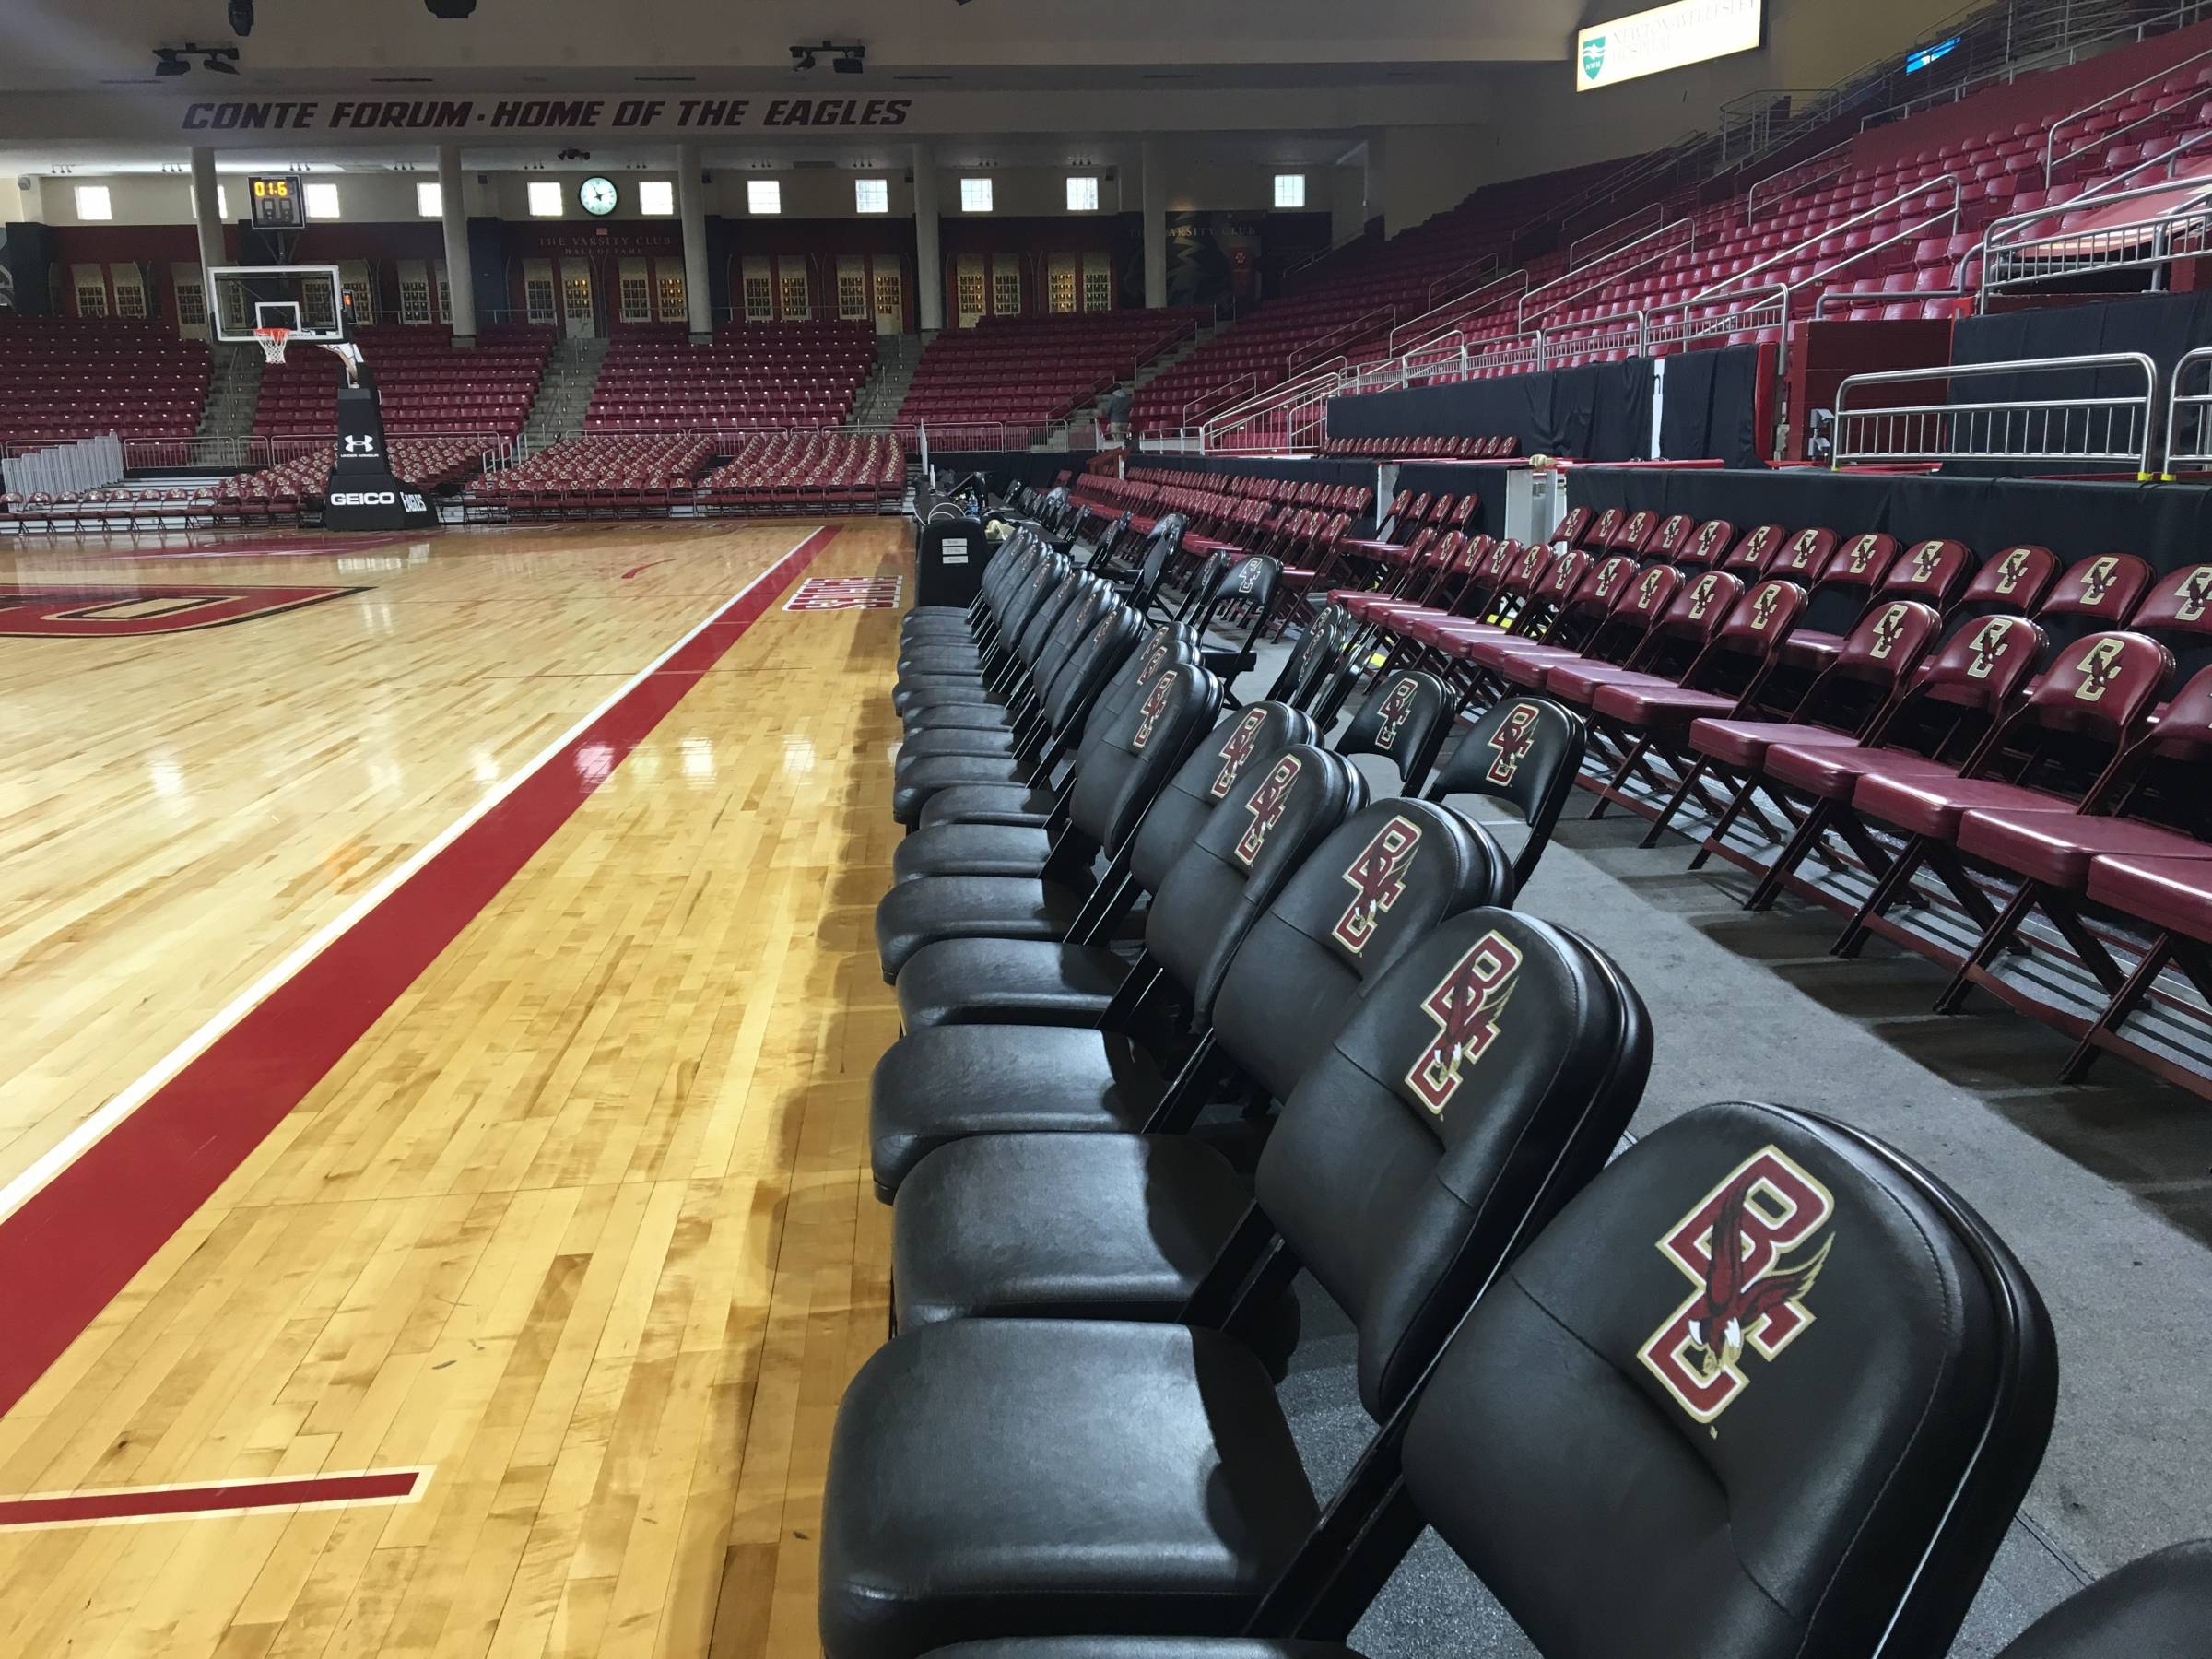 Court-side Seats behind benches at Conte Forum